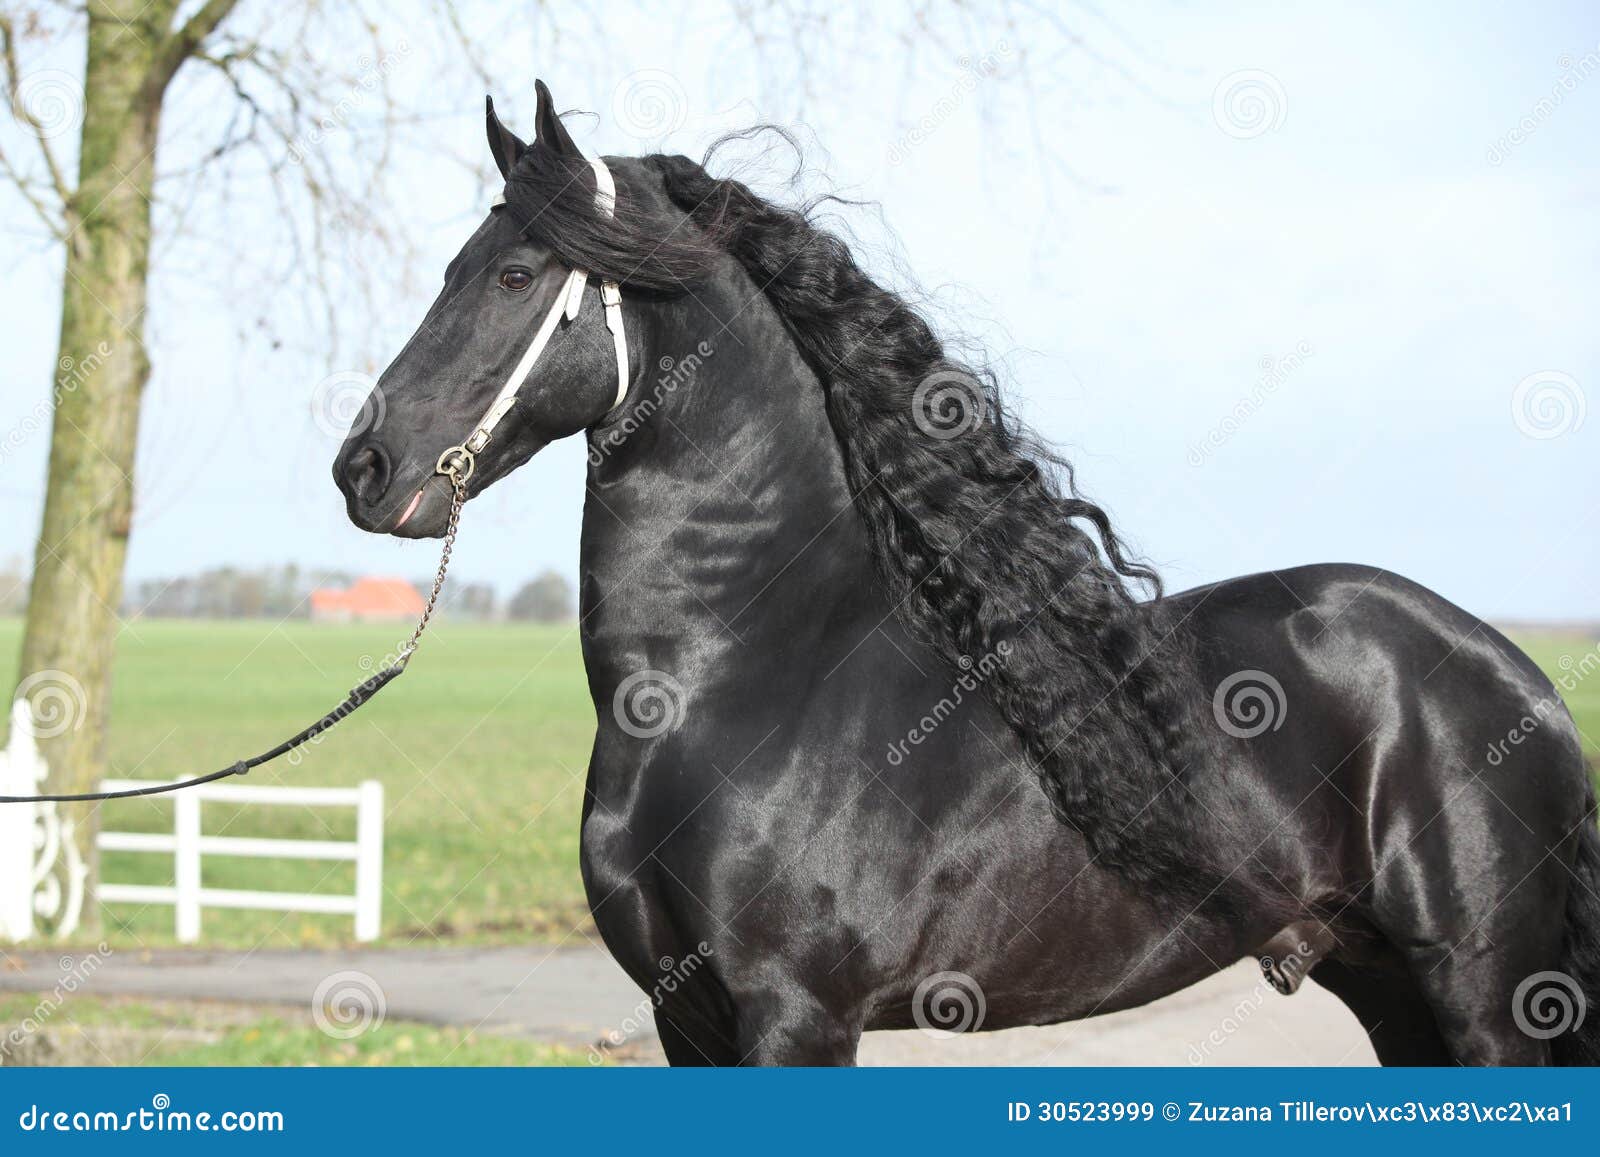 Gorgeous Friesian Stallion with Long Hair Stock Image - Image of rest,  outside: 30523999